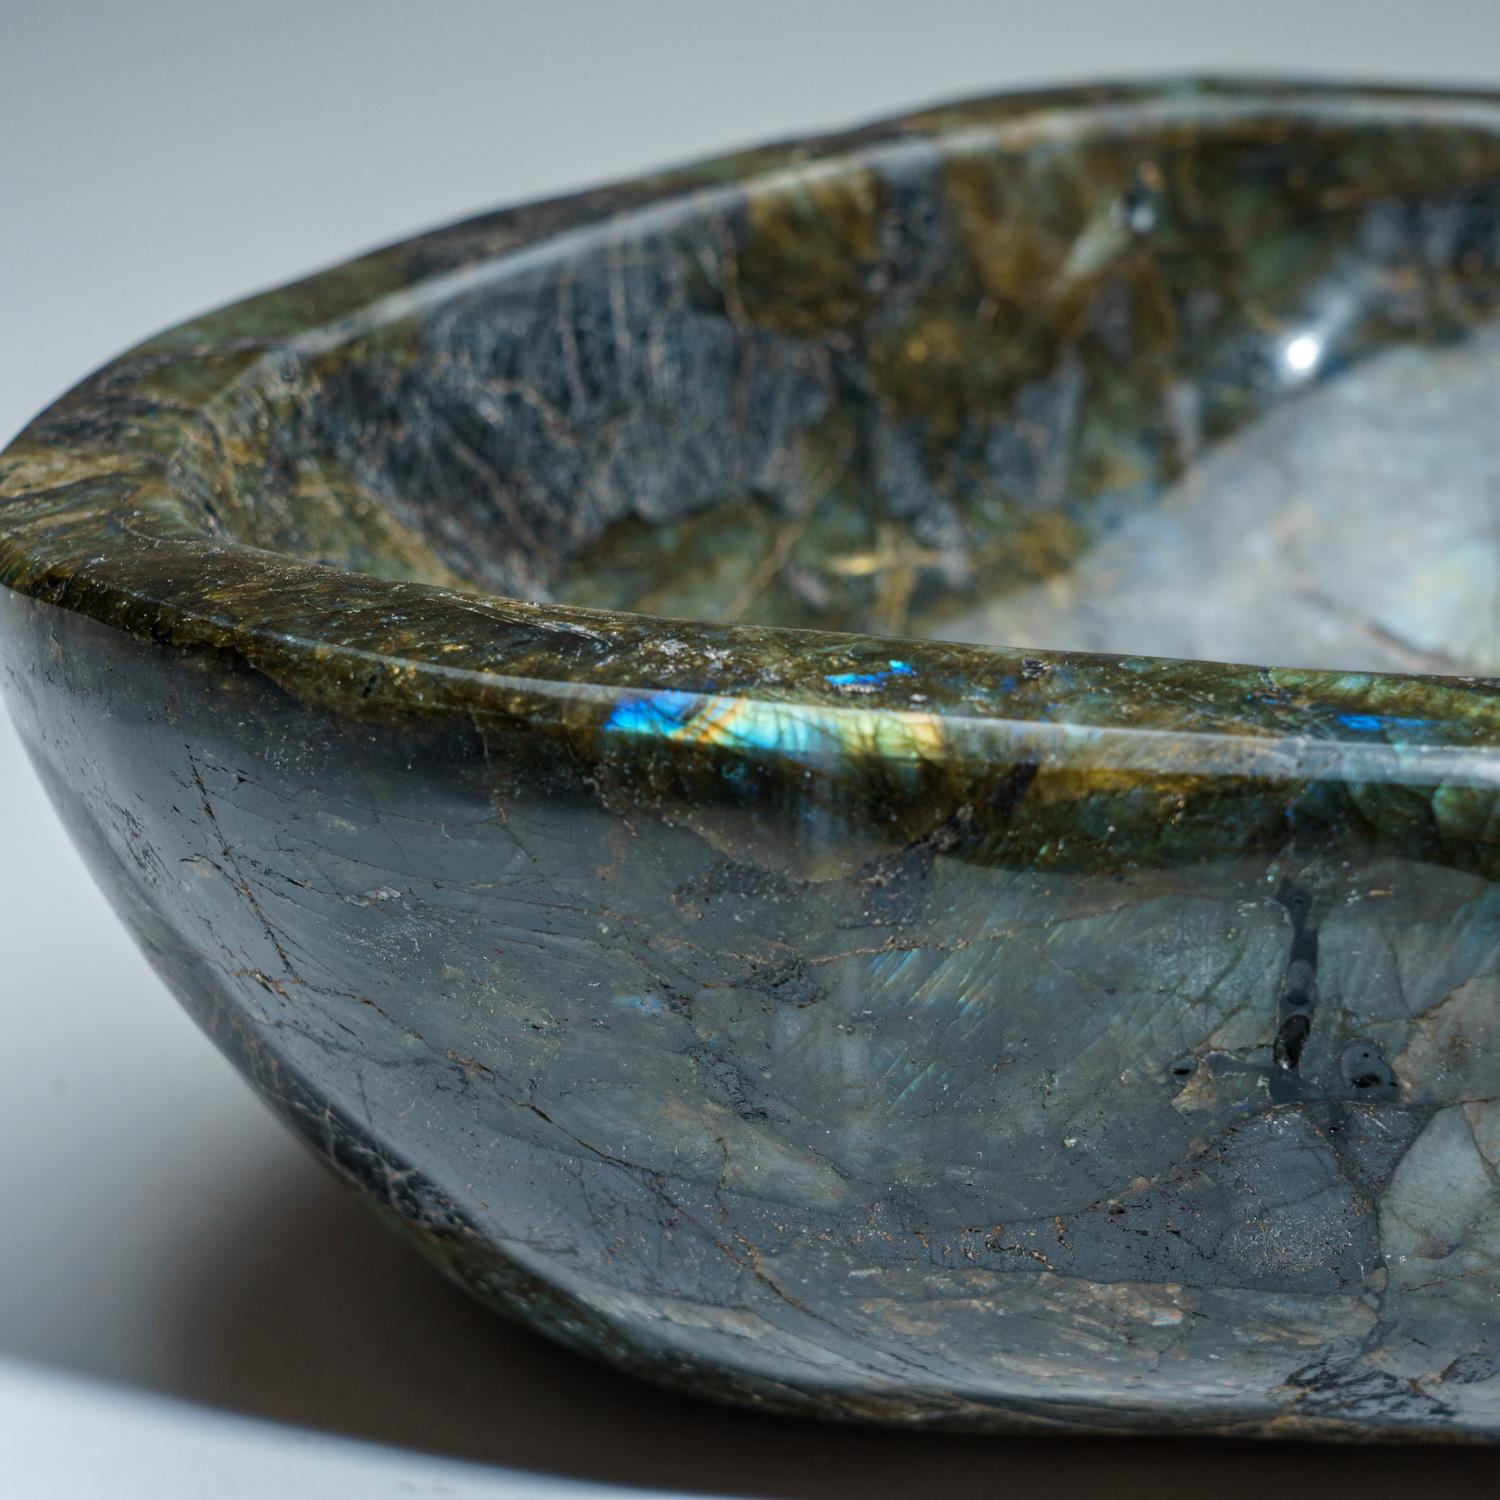 Beautiful hand polished Labradorite Bowl from Madagascar. This bowl has a beautiful, iridescent play of colors - blue and yellow which is caused by internal fractures in the mineral that reflect light back and forth, dispersing it into different